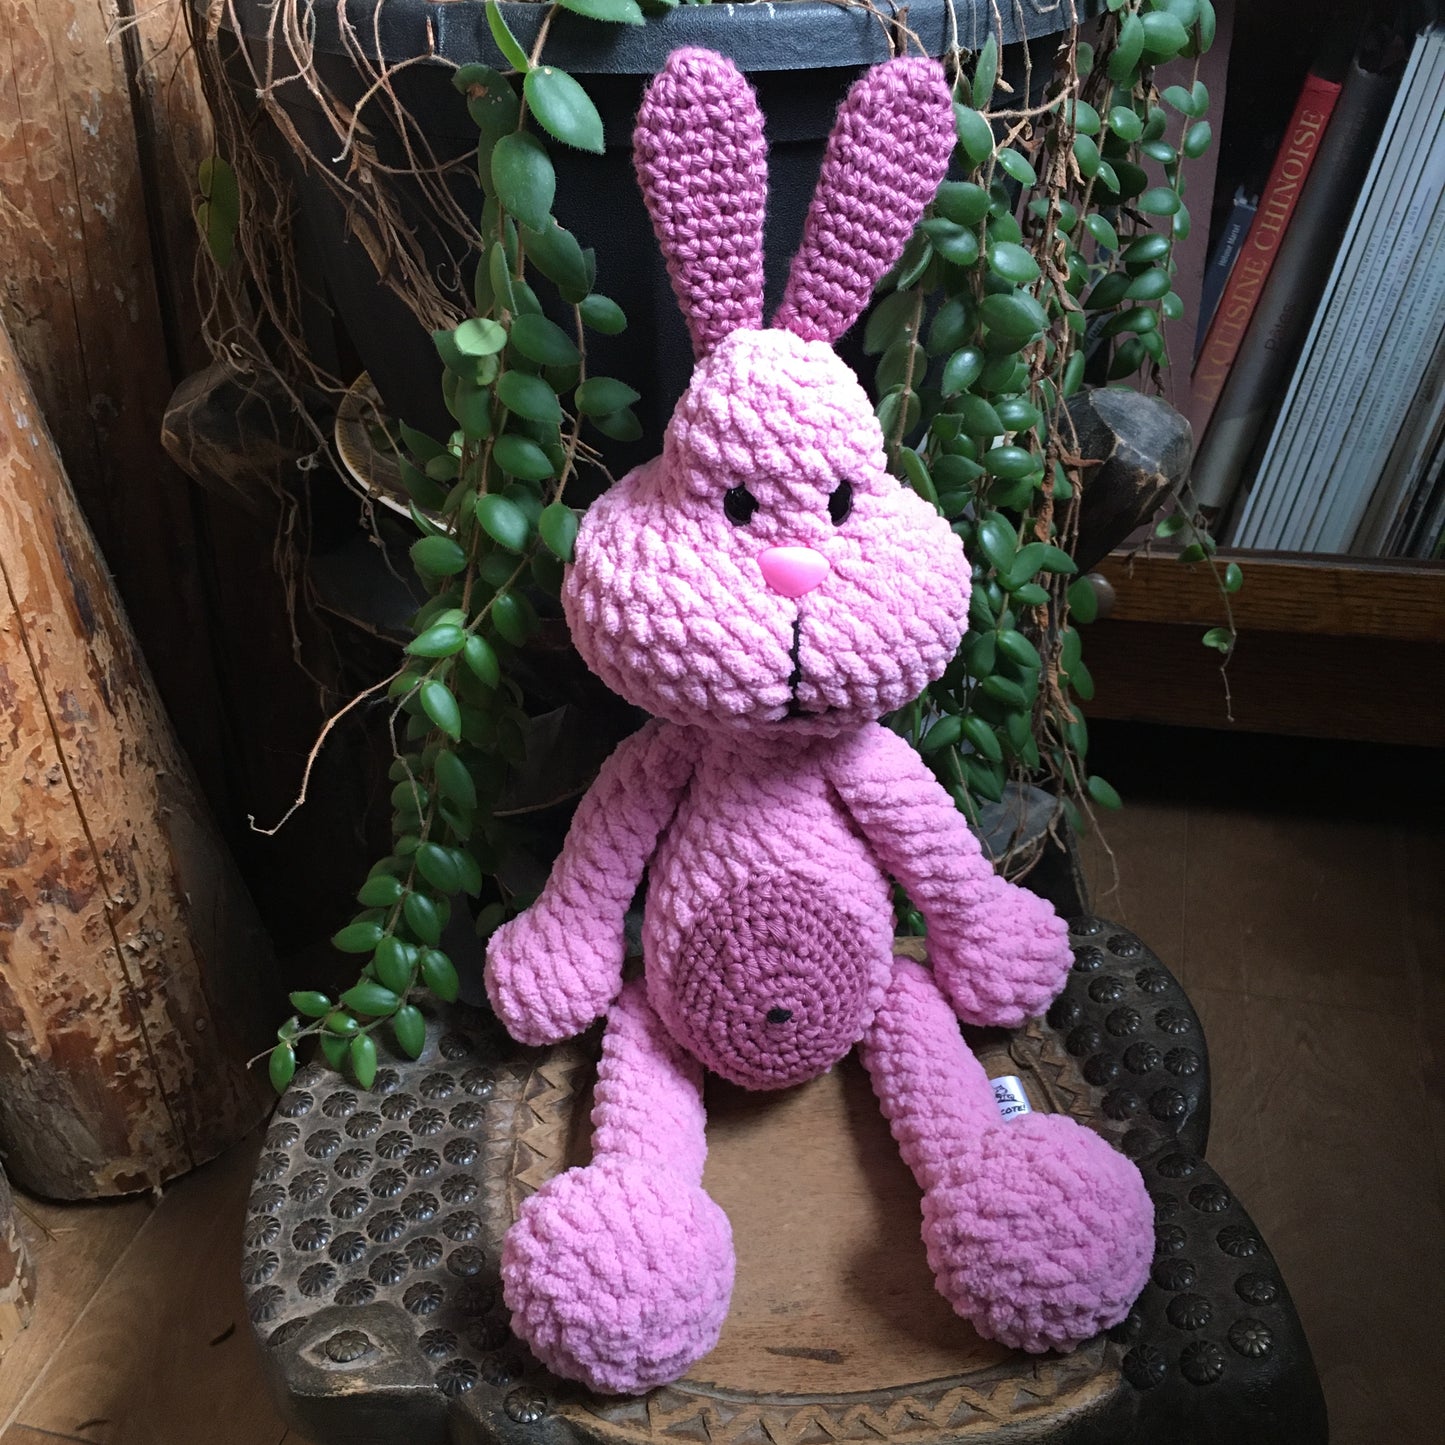 PERLIN PINPIN the bunny, Crochet pattern to download, French and English PDF